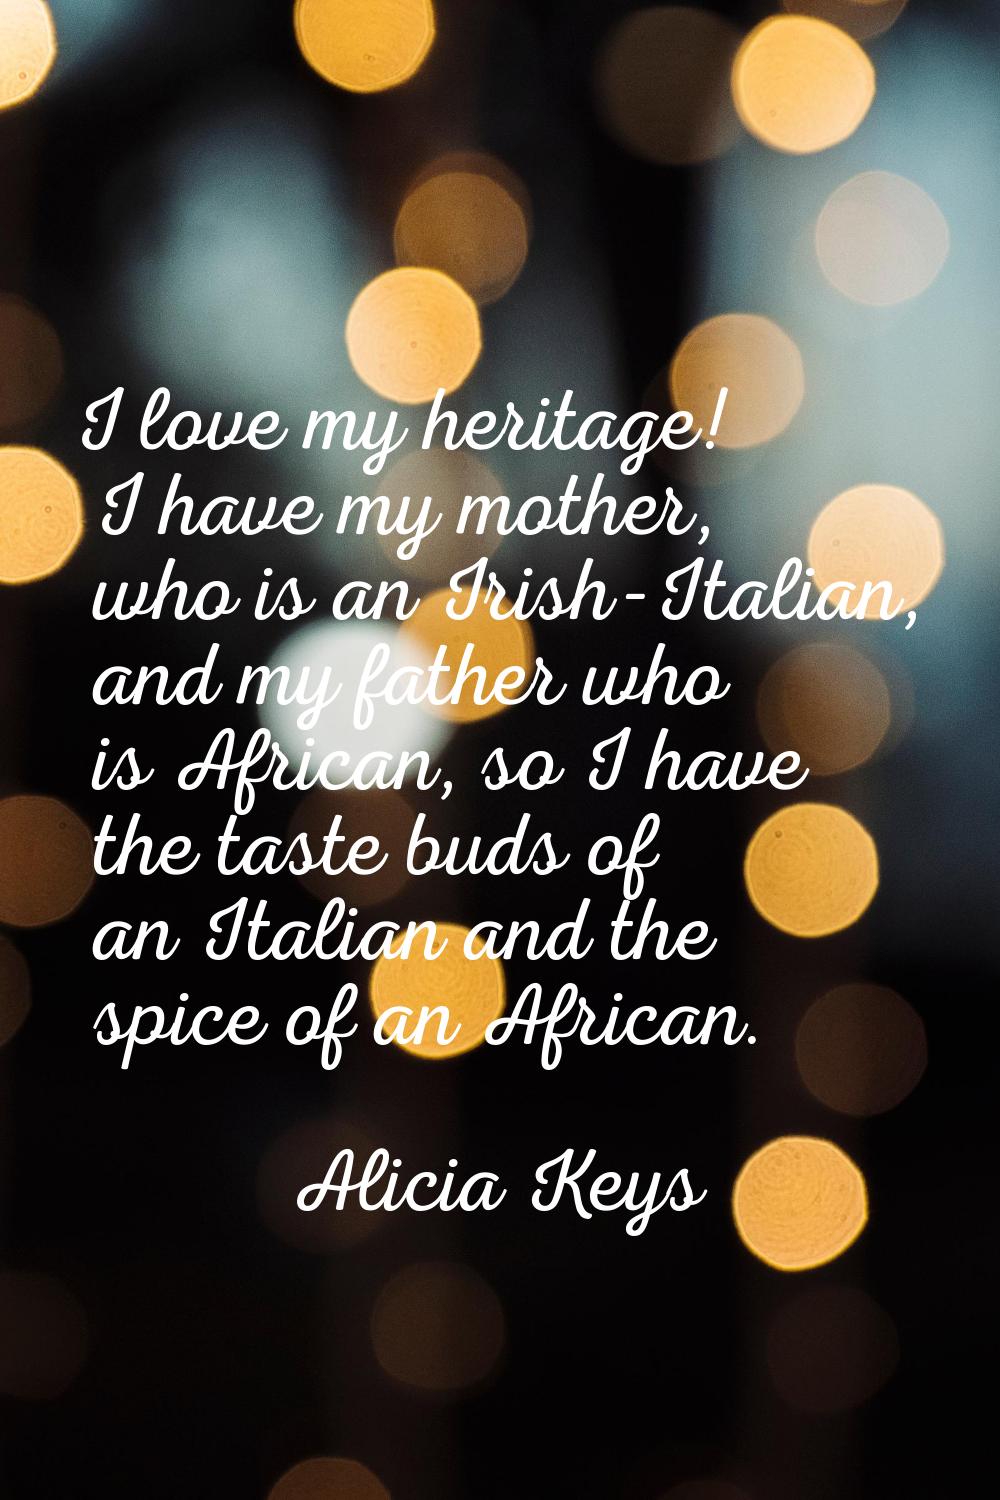 I love my heritage! I have my mother, who is an Irish-Italian, and my father who is African, so I h